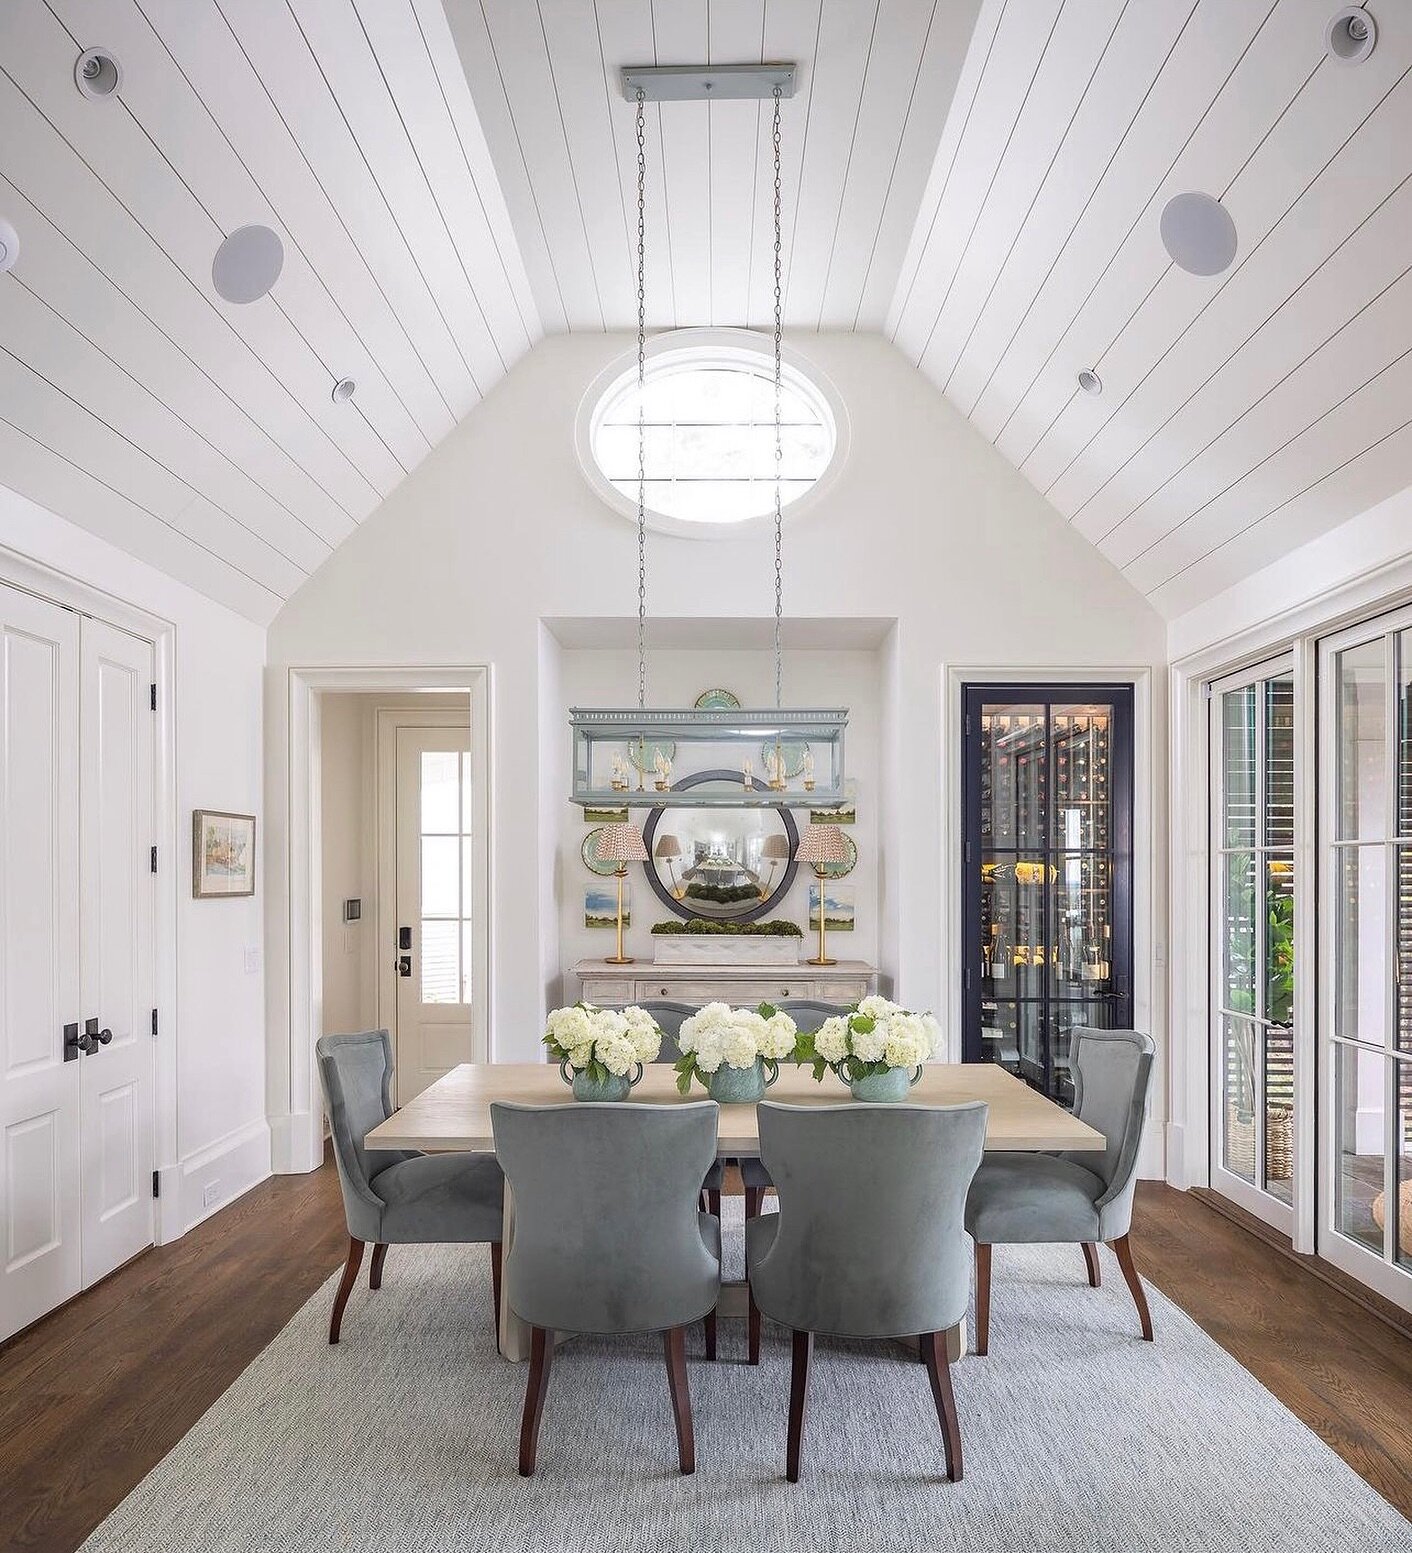 Grab a bottle of wine from your wine closet and enjoy a glass of wine with friends in this lovely low country inspired dining room

Designer: @studioentourage 
Builder: @livingstonfinehomes 
Photographer: @davidcannonarchitectural